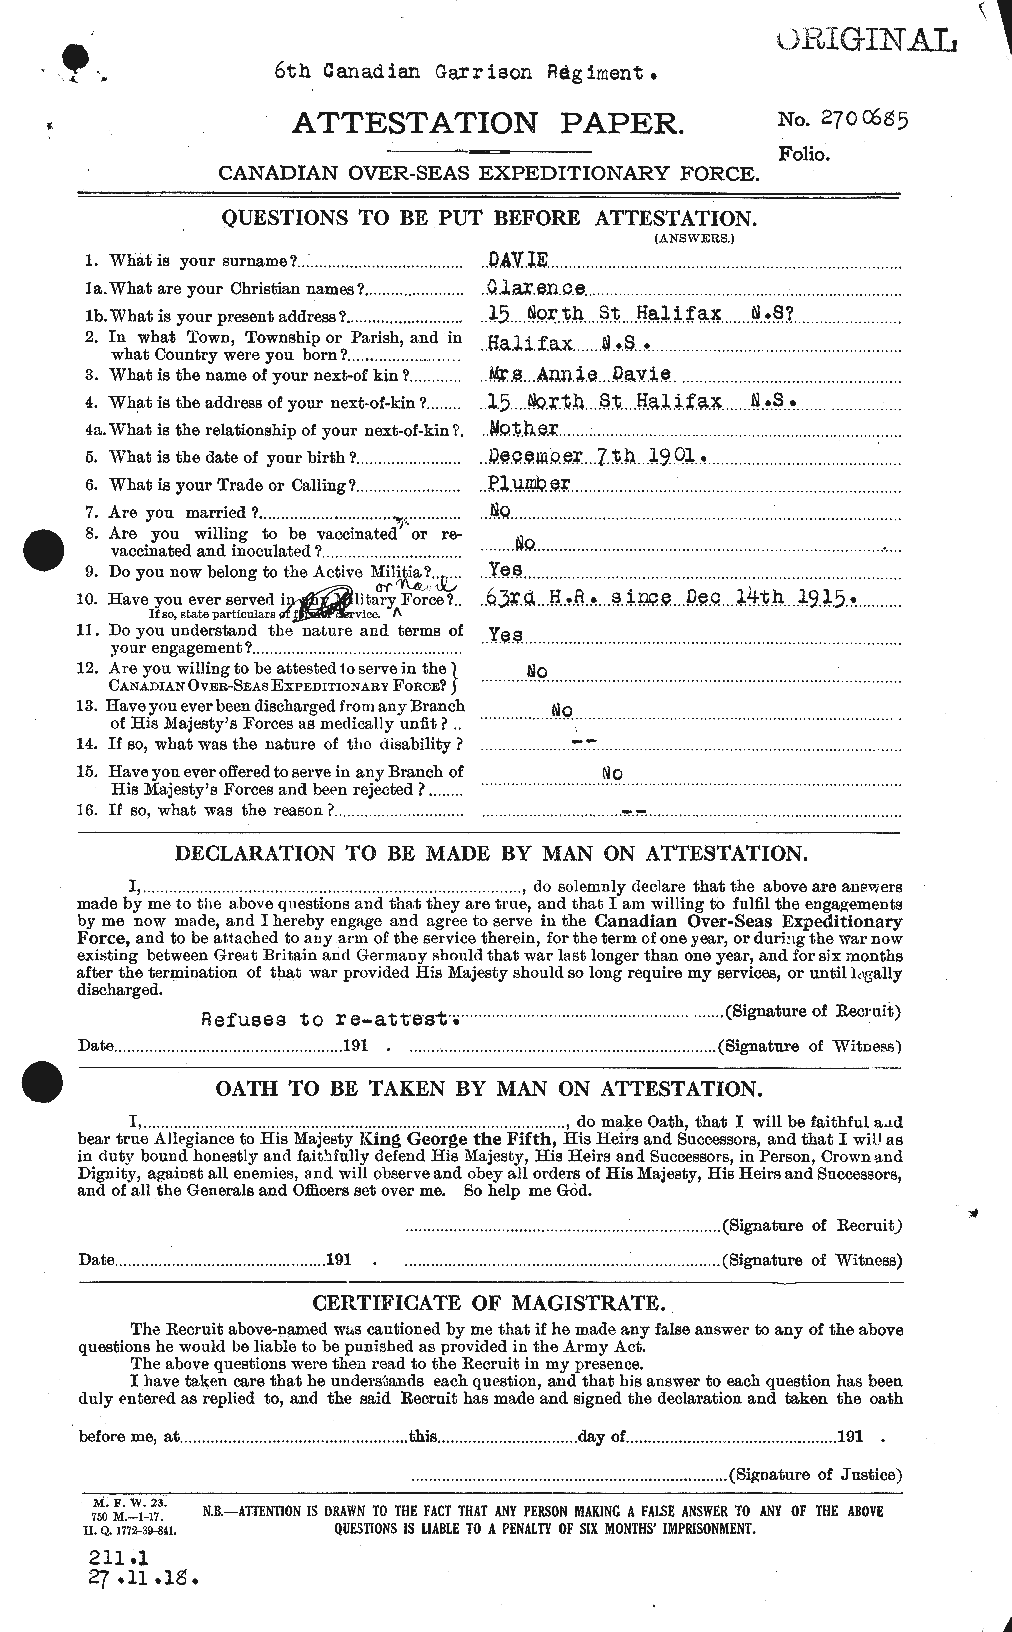 Personnel Records of the First World War - CEF 278816a